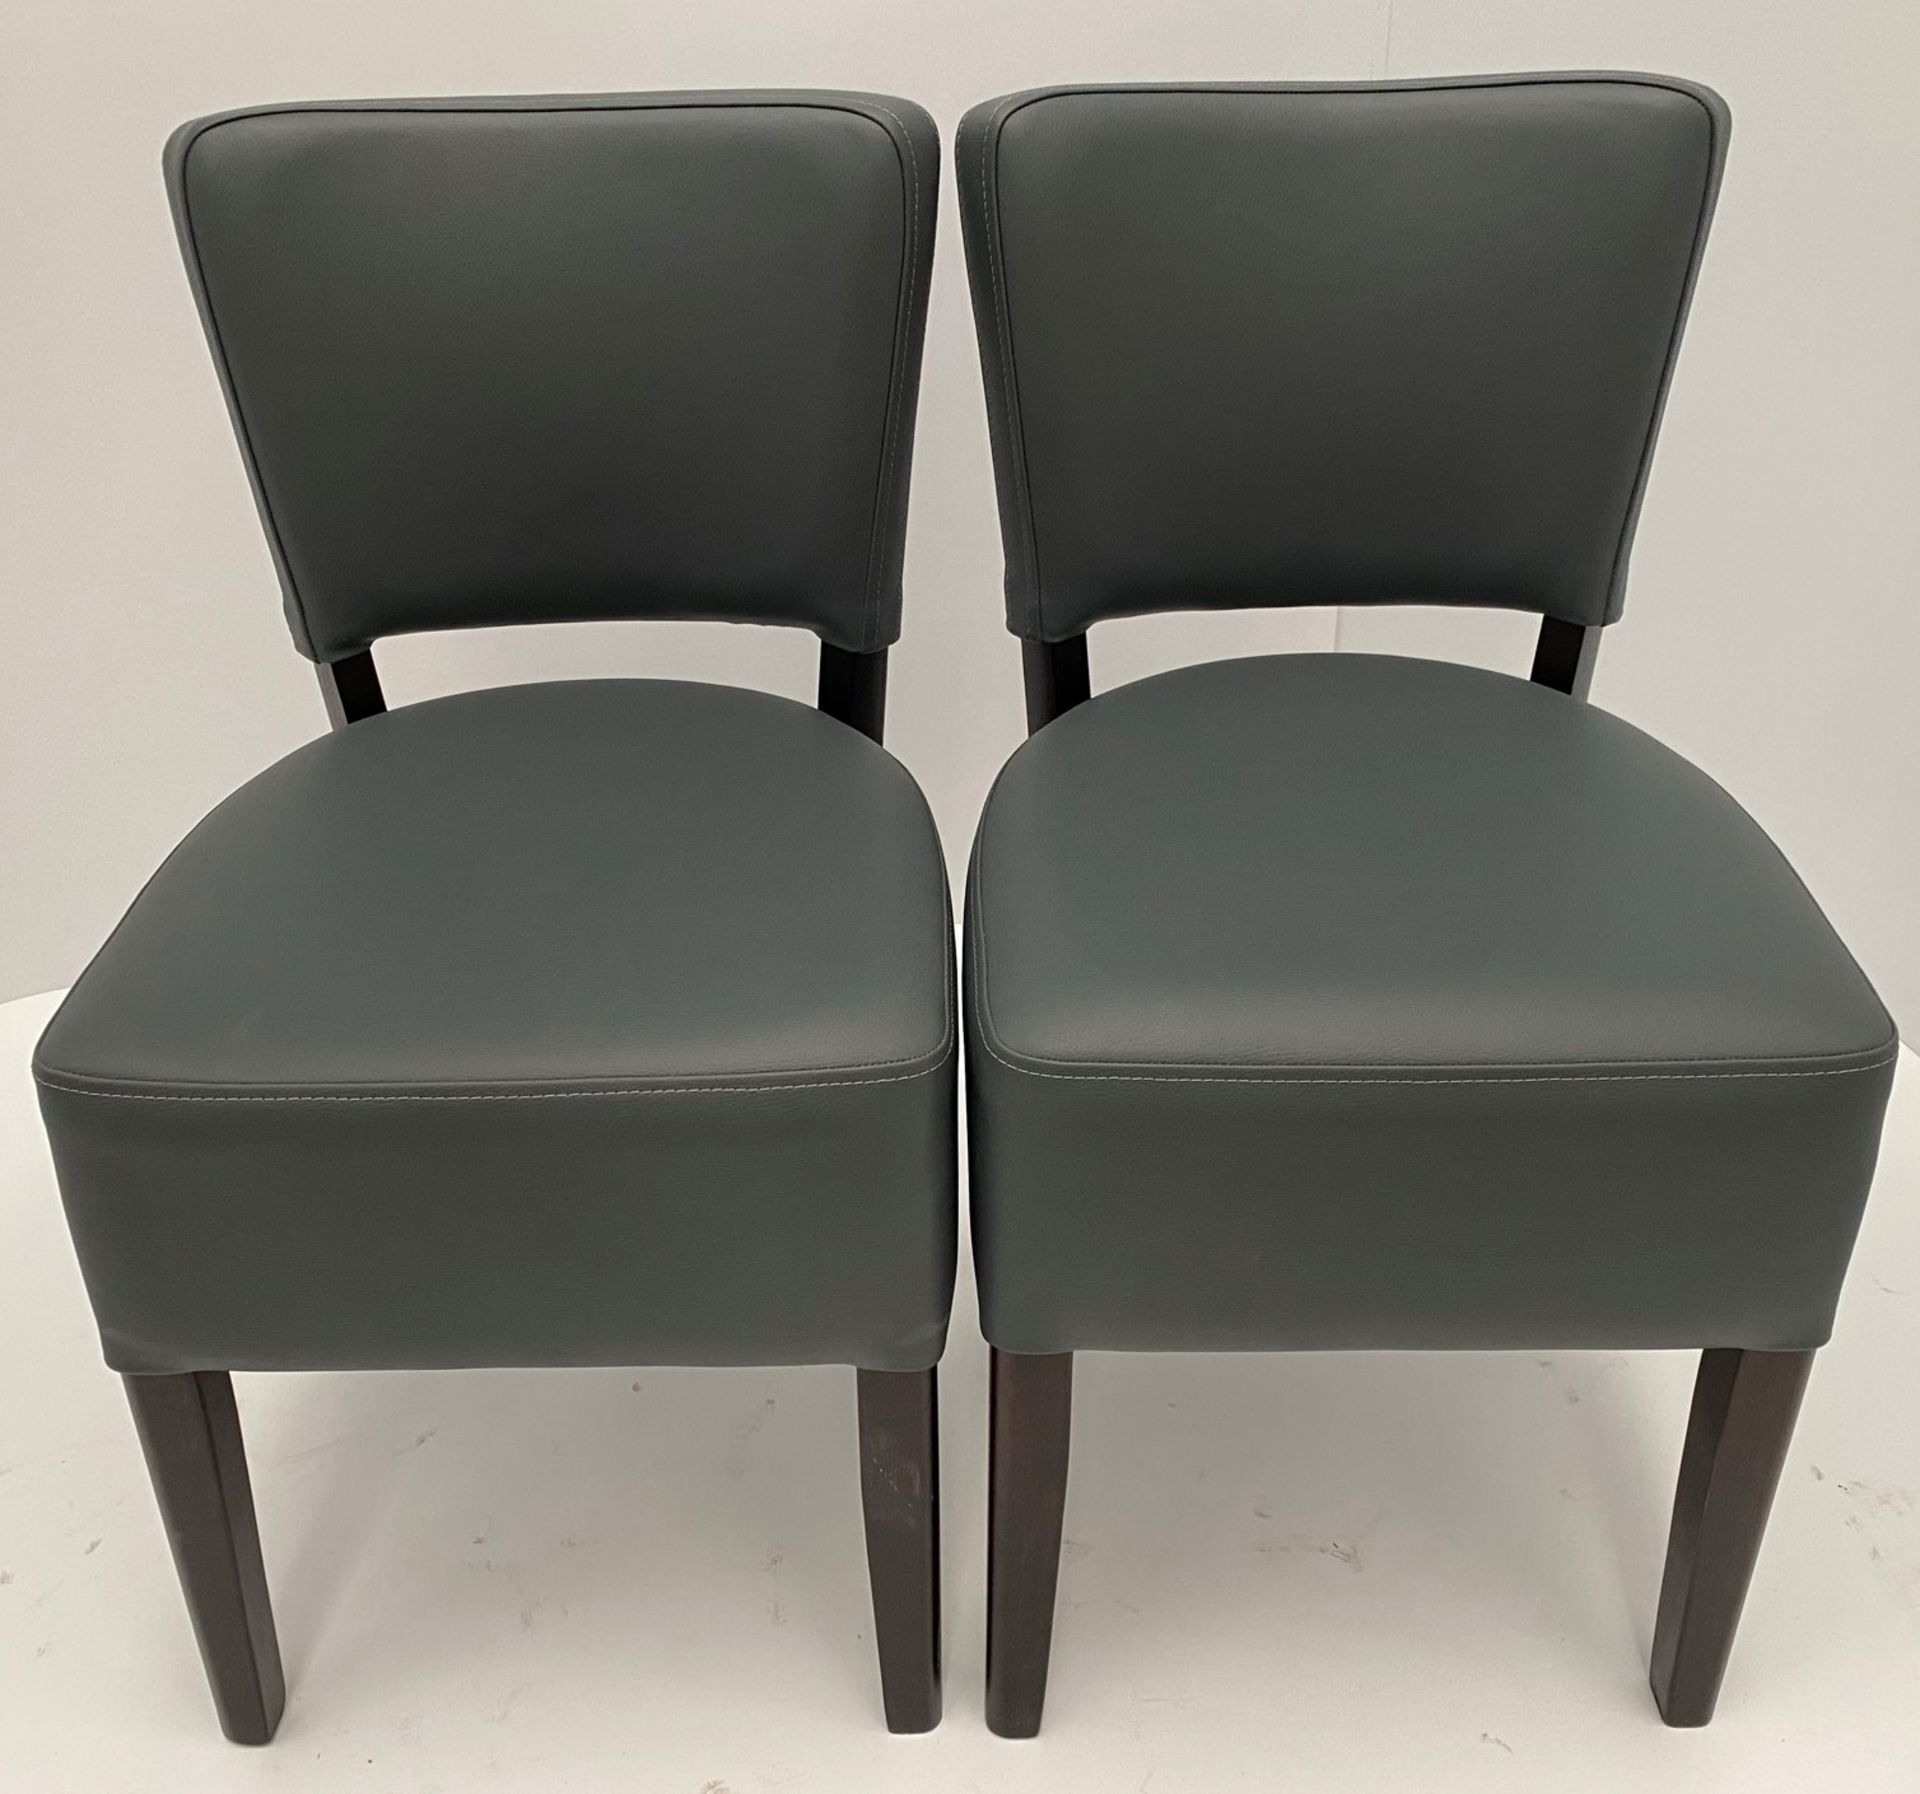 2 x Memphis Vena SA-4 Grey side/dining chairs with Wenge coloured frames